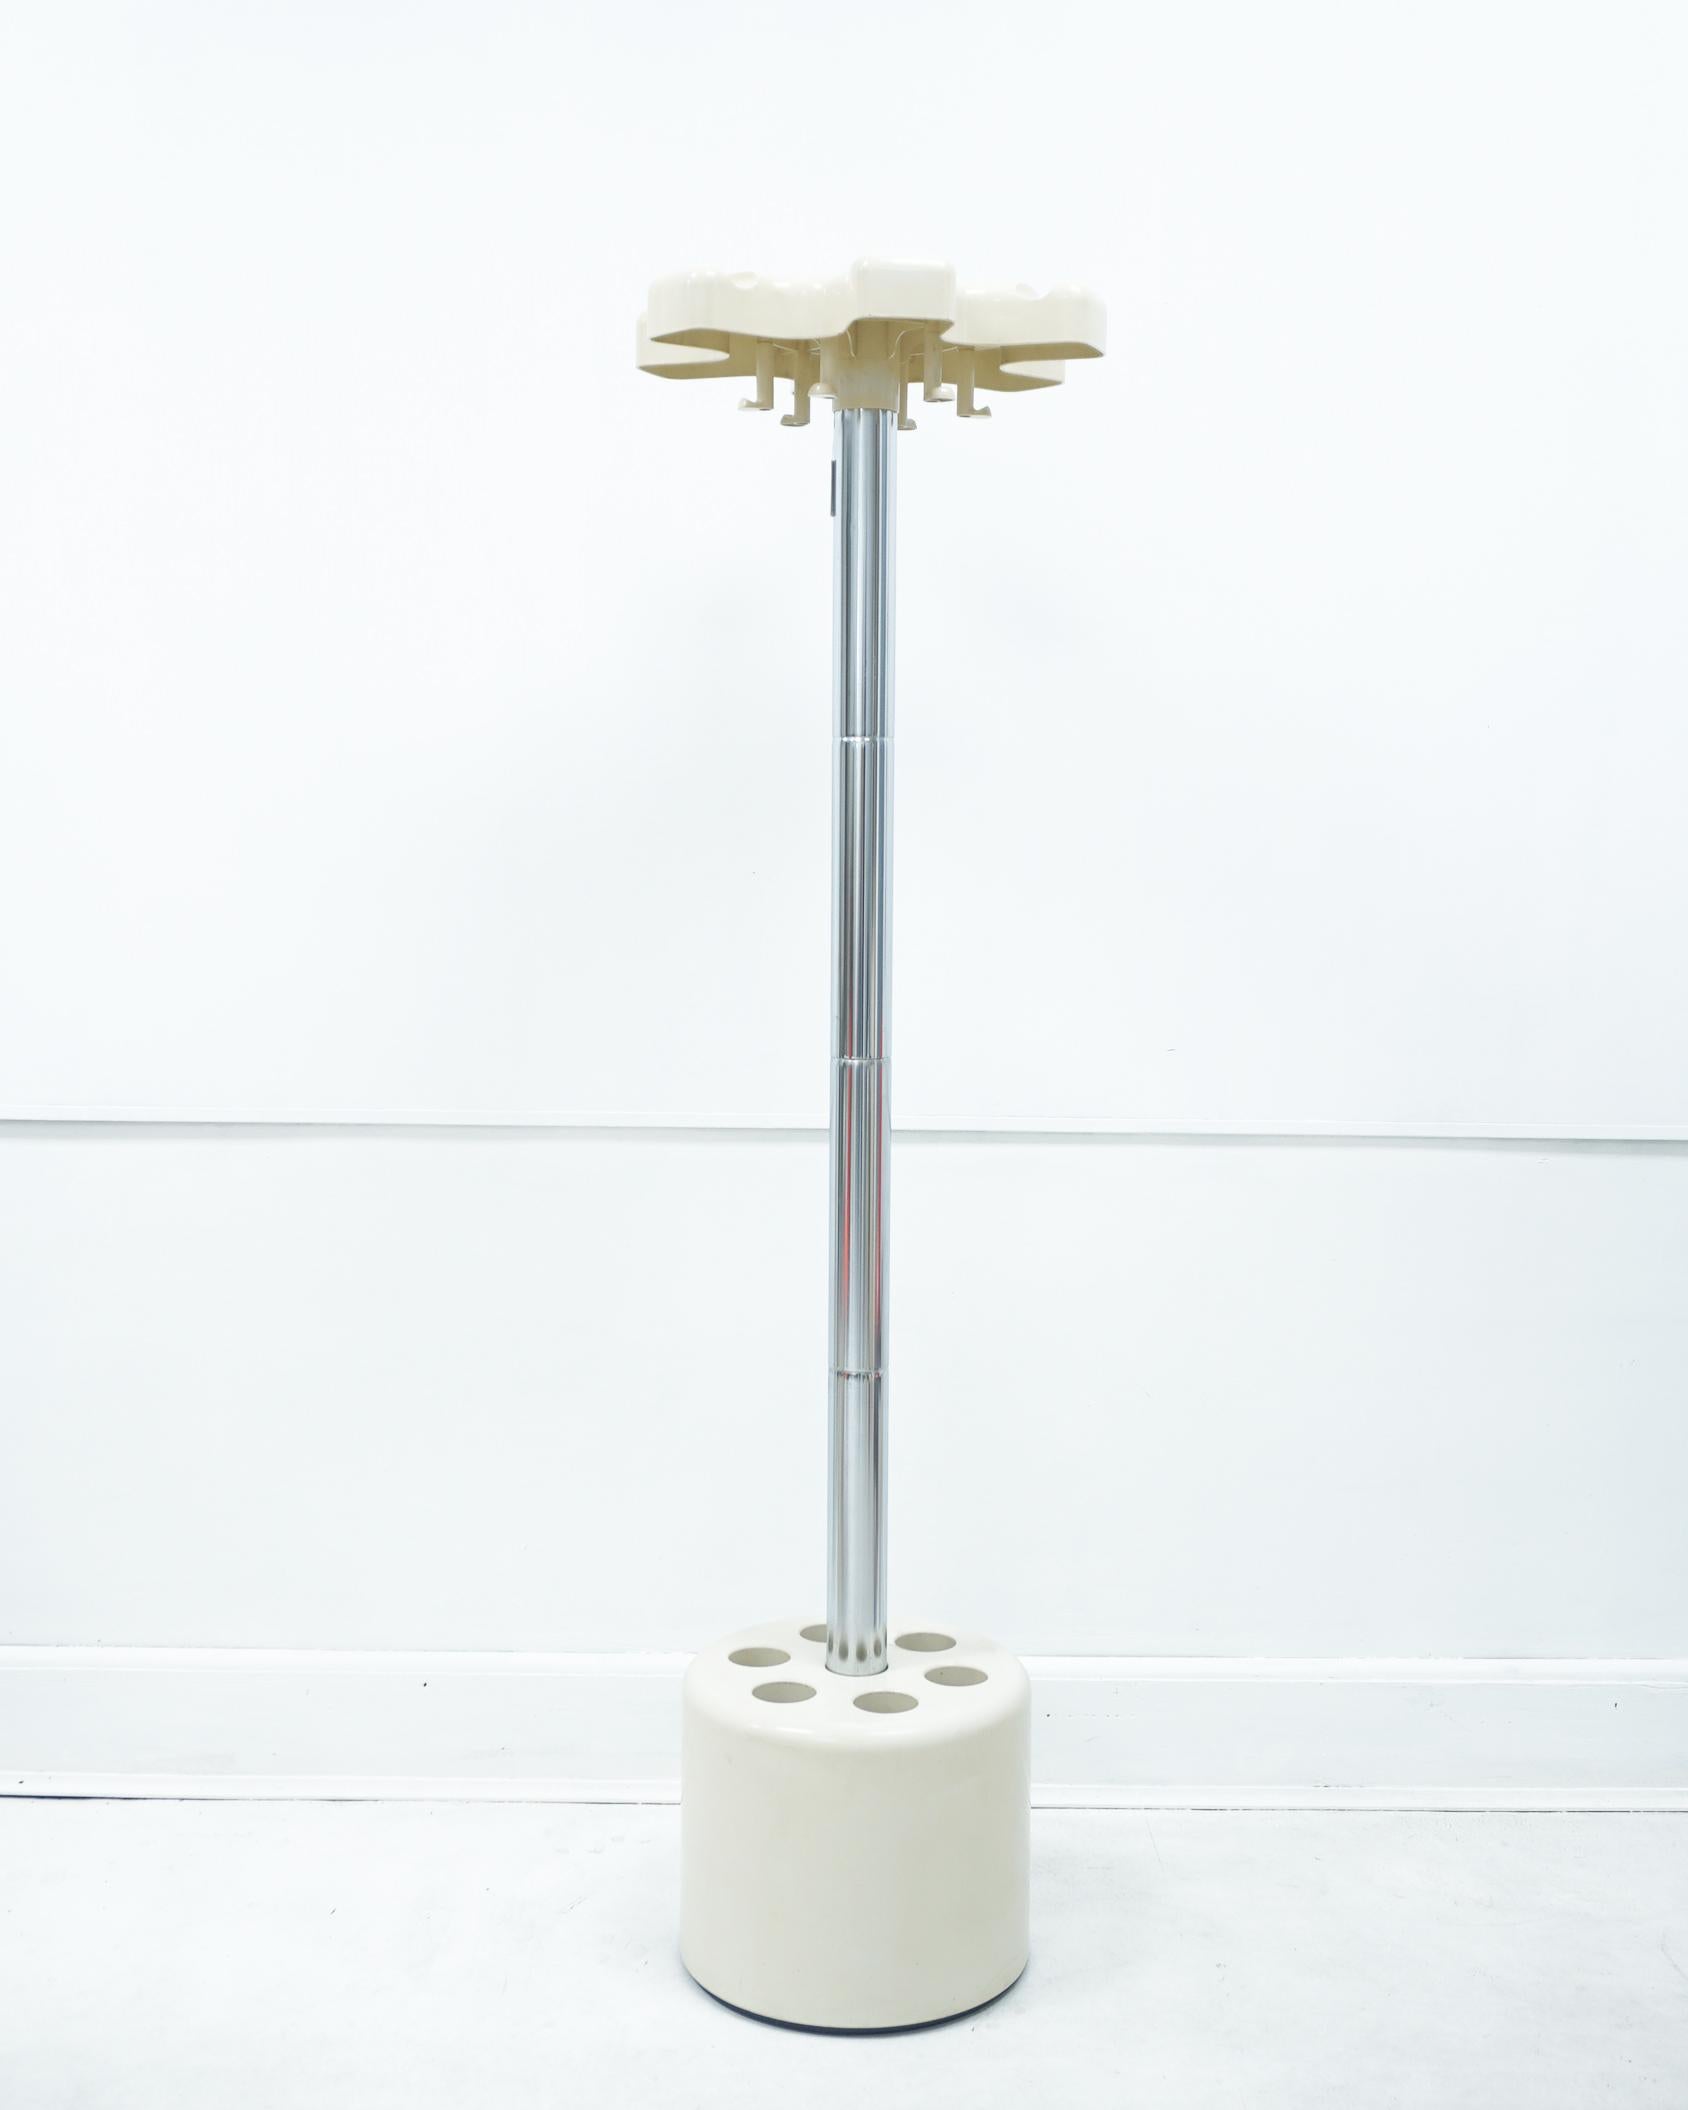 1960s Modular structure, the tube can be dismantled and adjusted in height. Cream ABS plastic and chrome. Six coat hooks. The bottom can be removed for cleaning. The base is heavy and serves as a 6-umbrella stand. Good condition with some signs of